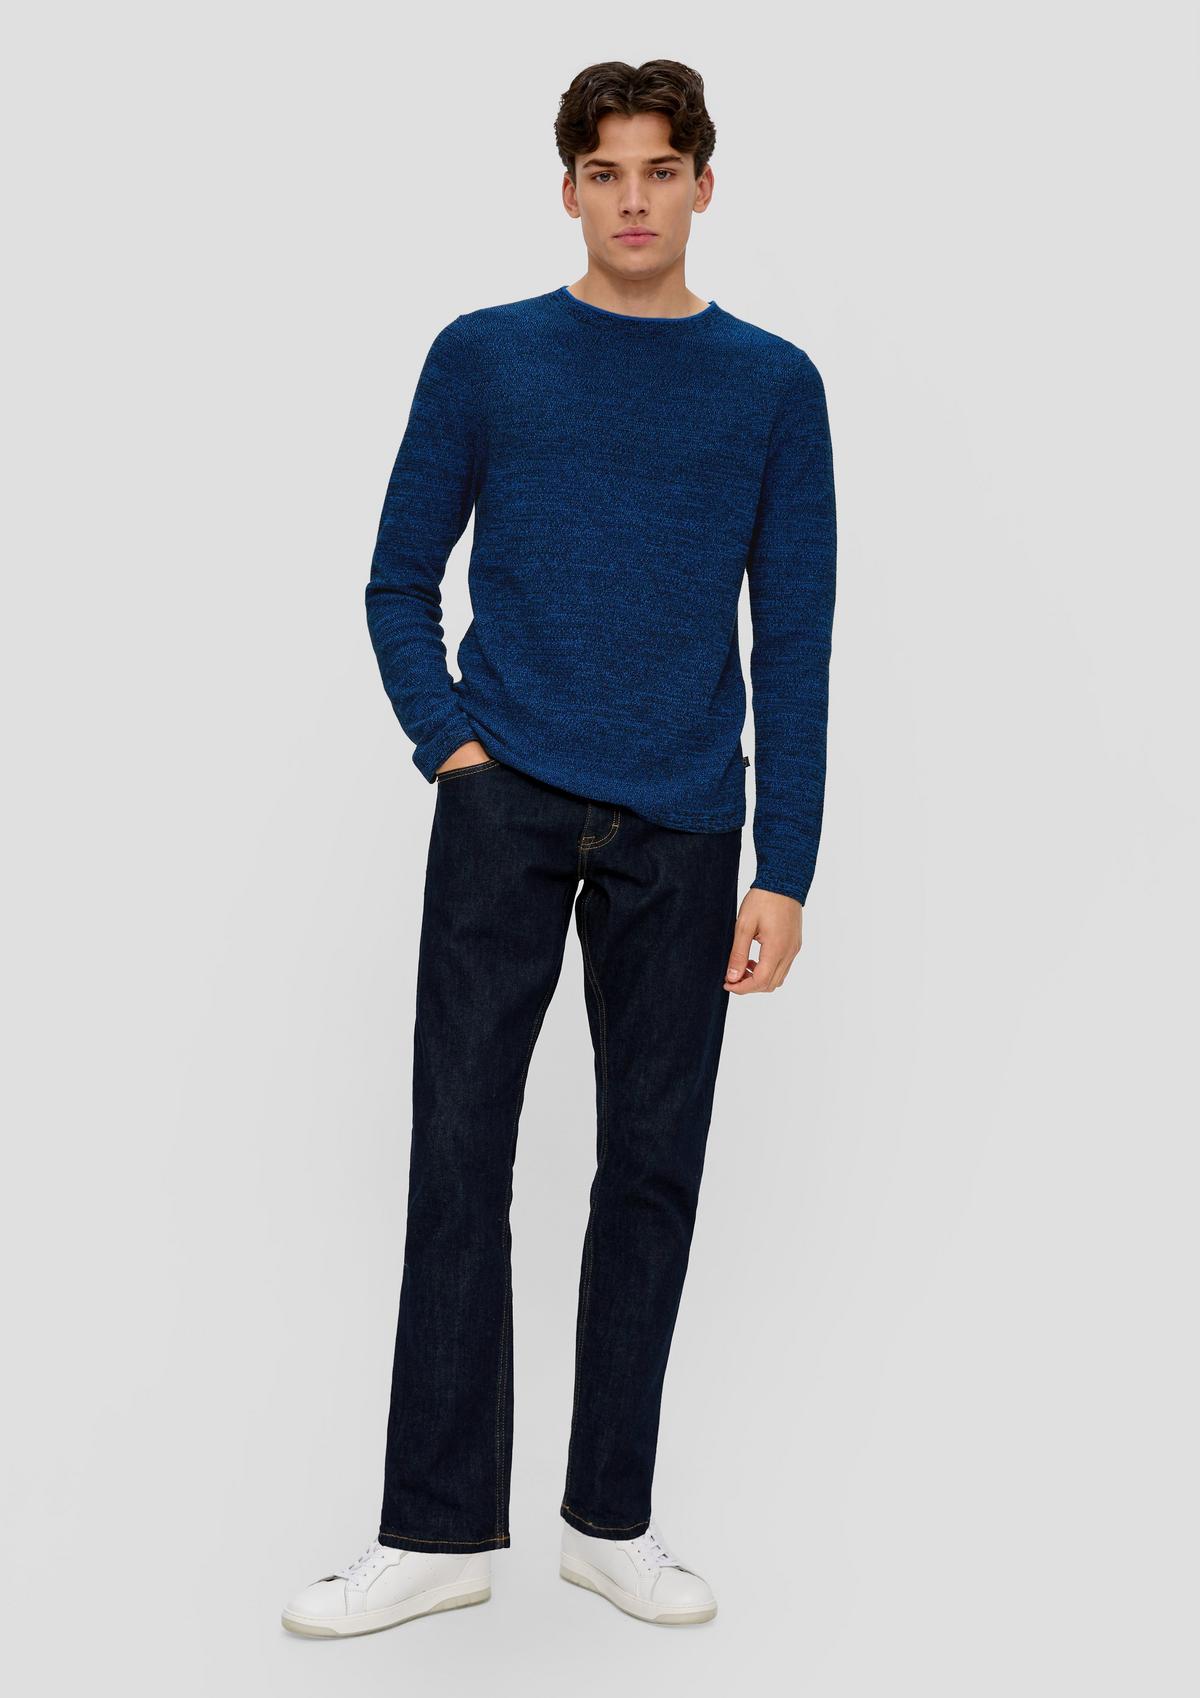 s.Oliver Pure cotton knitted jumper